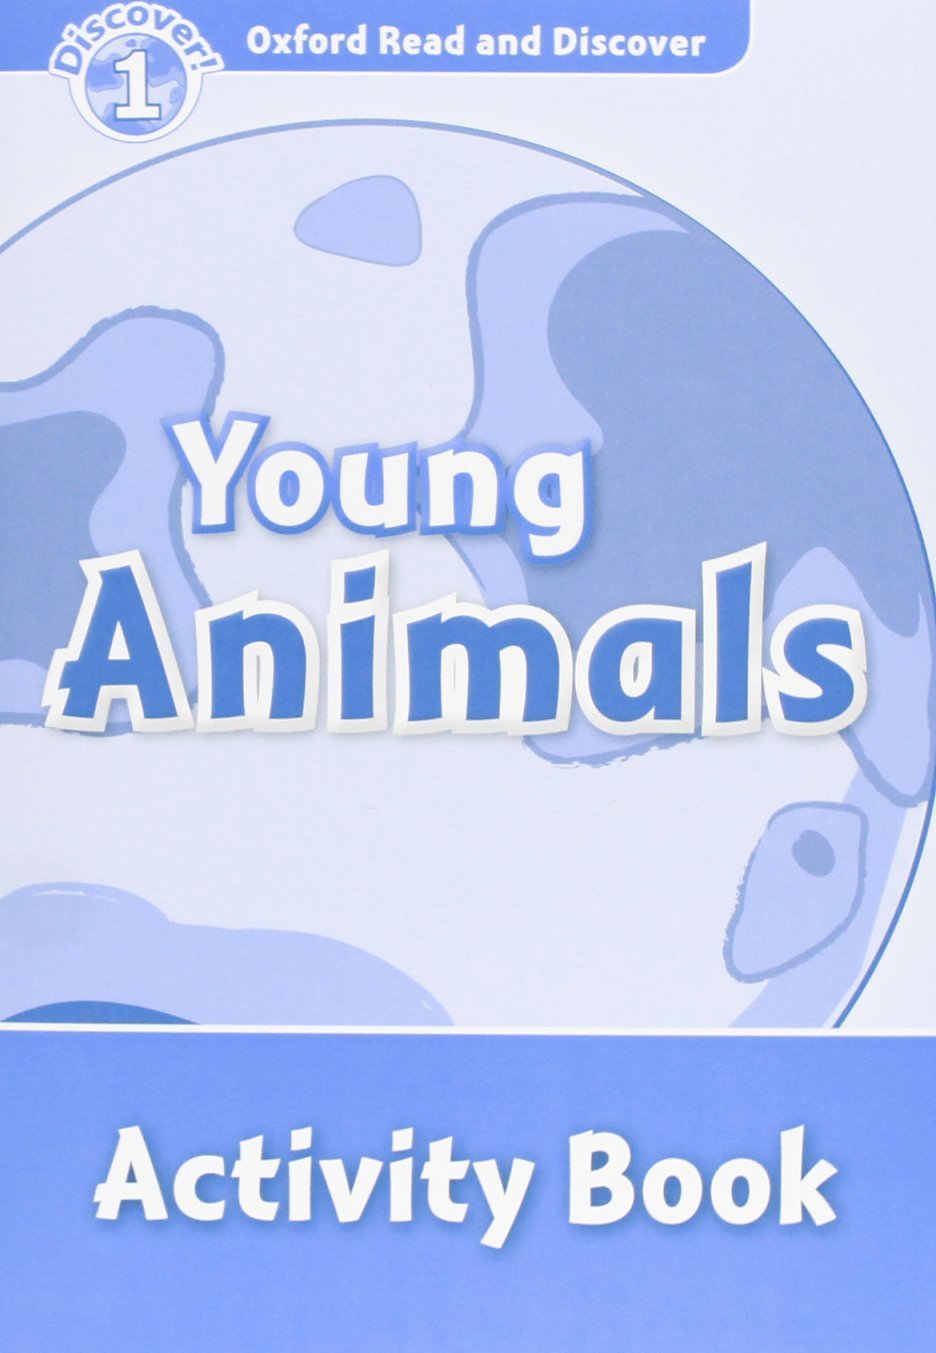 YOUNG ANIMALS (OXFORD READ AND DISCOVER, LEVEL 1) Activity Book